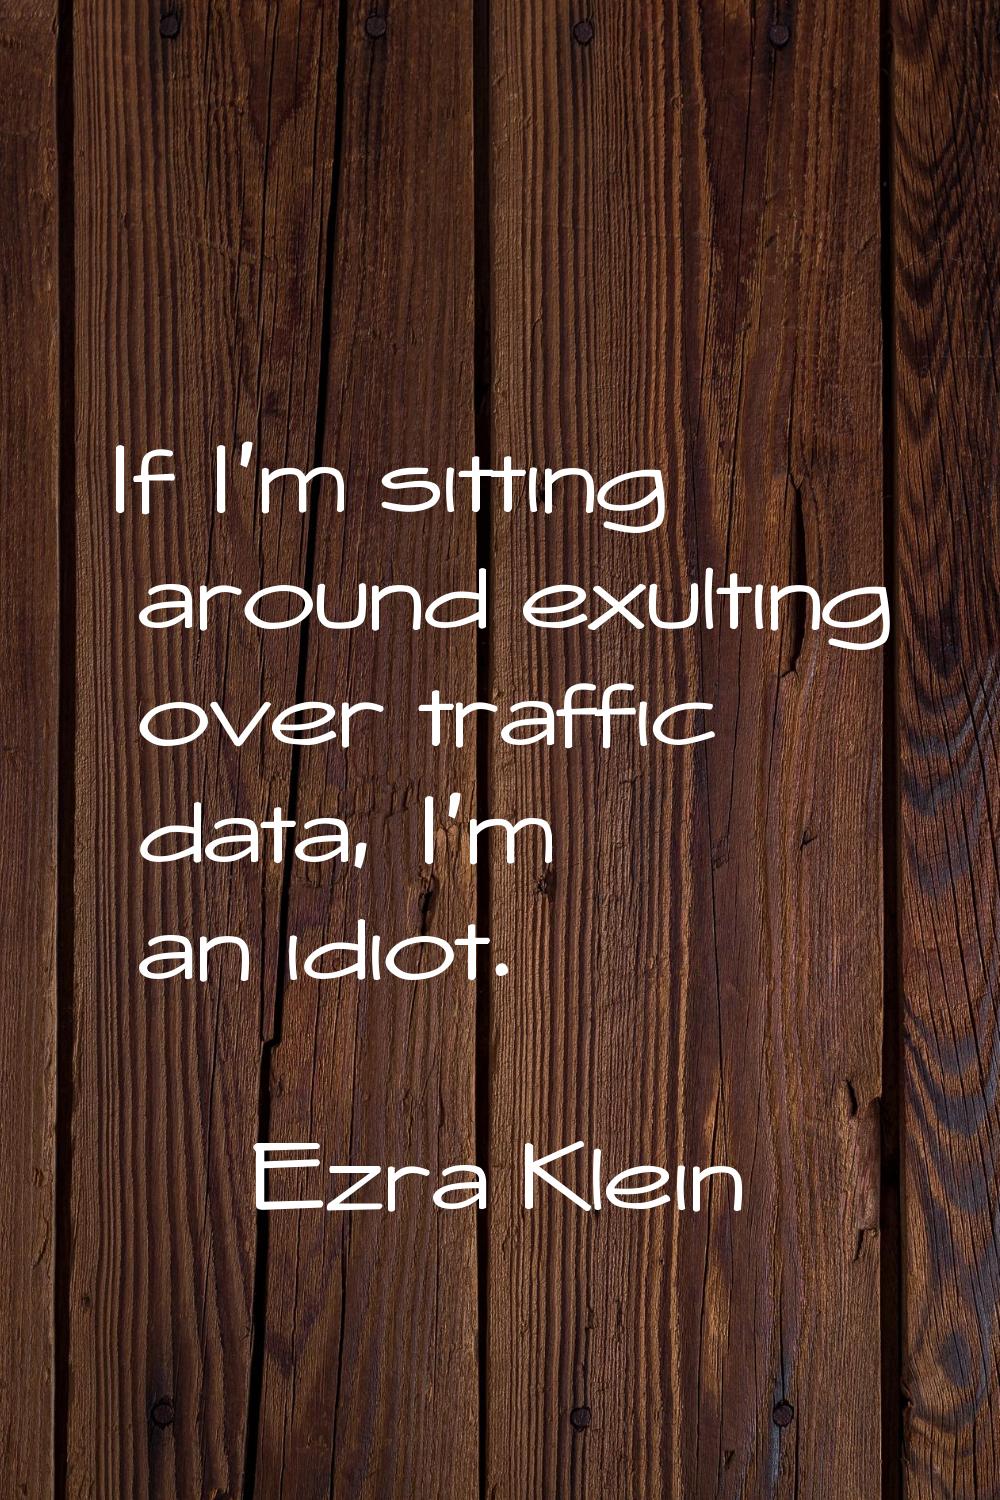 If I'm sitting around exulting over traffic data, I'm an idiot.